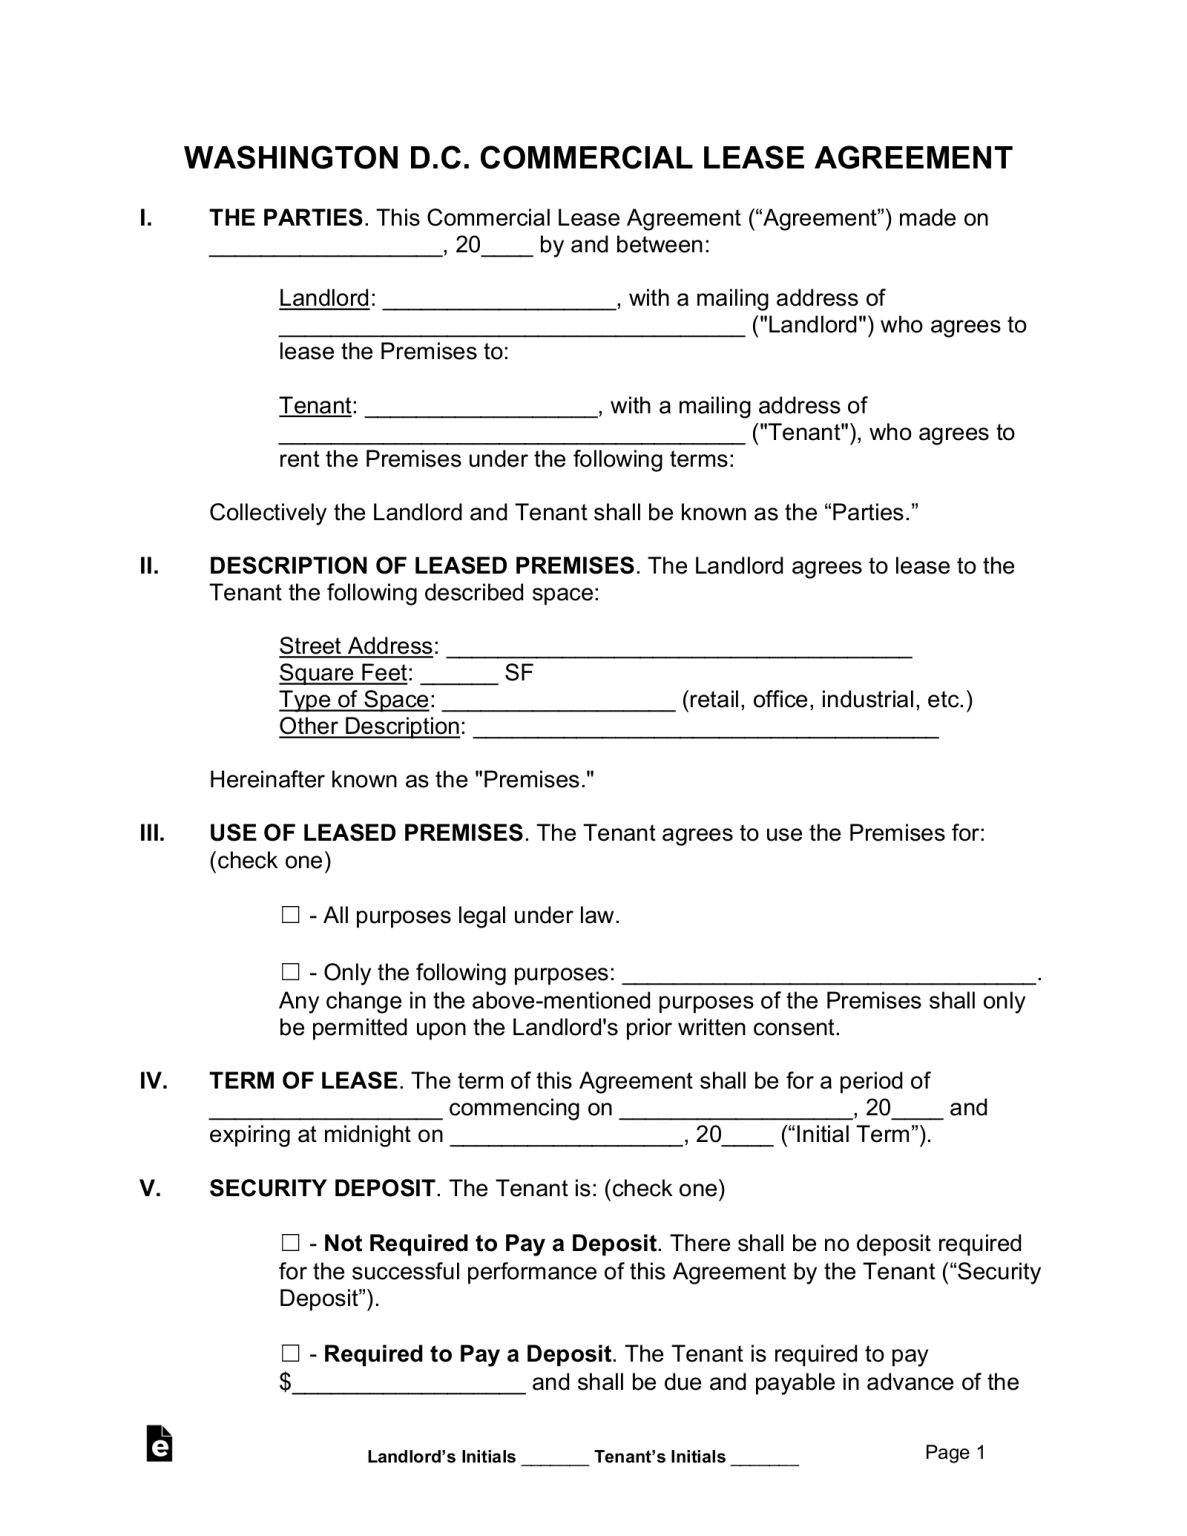 Free Washington D.C. Commercial Lease Agreement Template